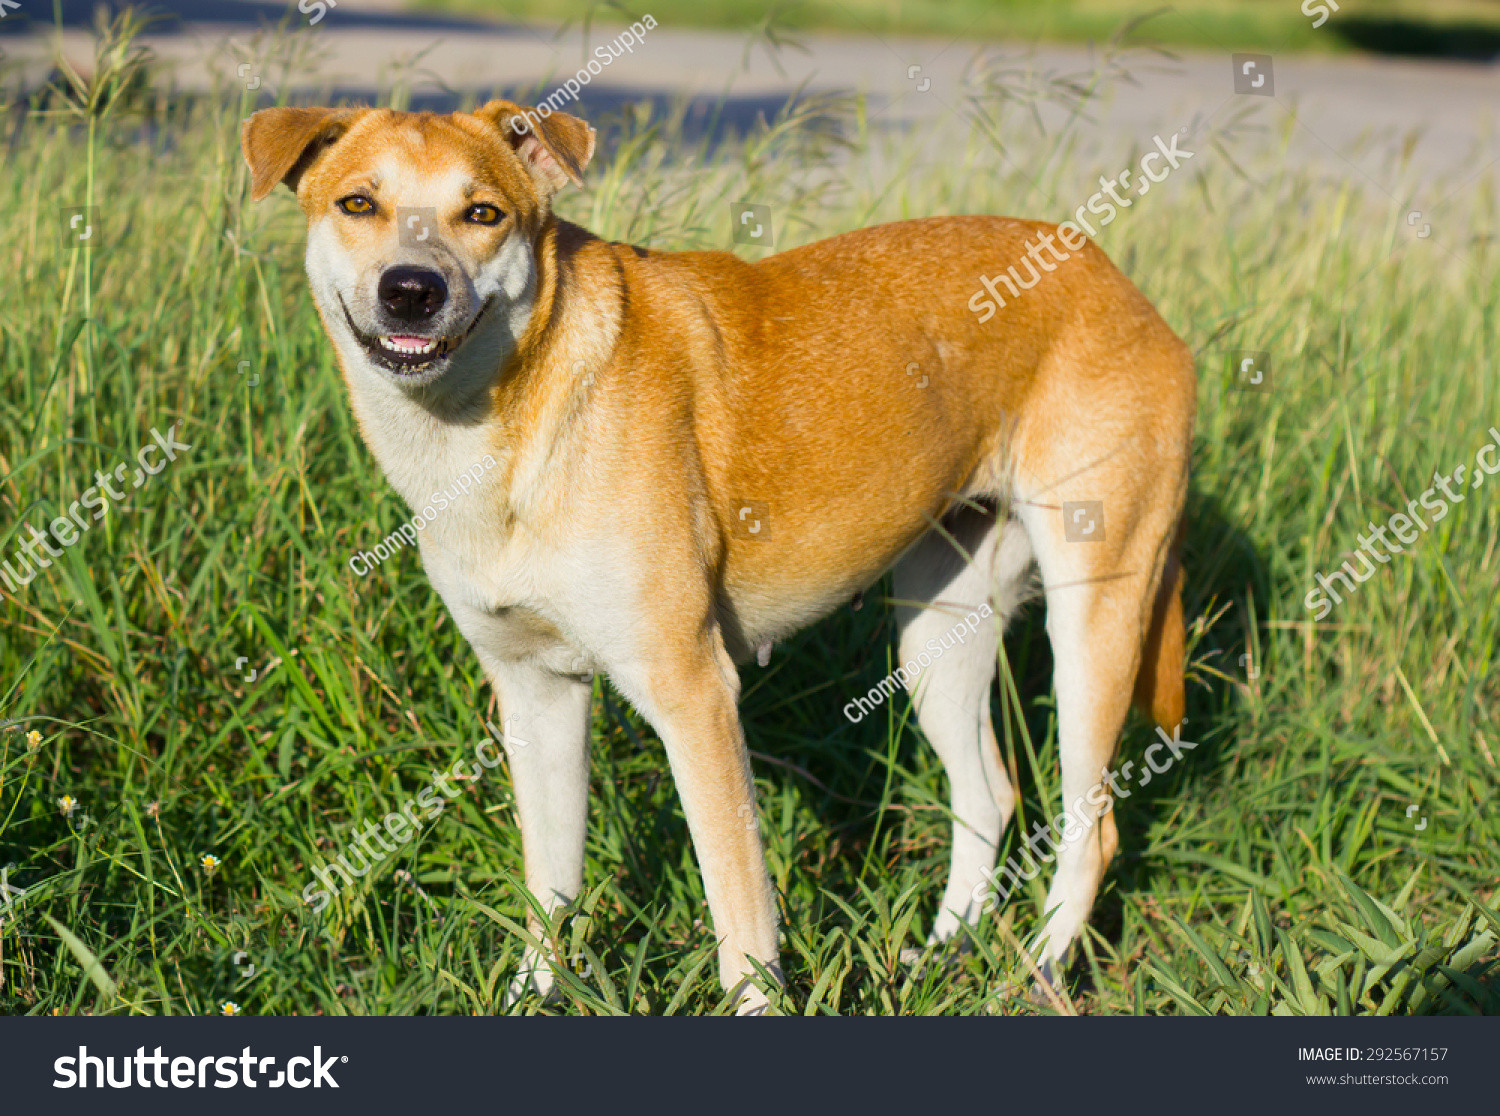 Brown Short Hair Dog Standing Position Stock Photo Edit Now 292567157